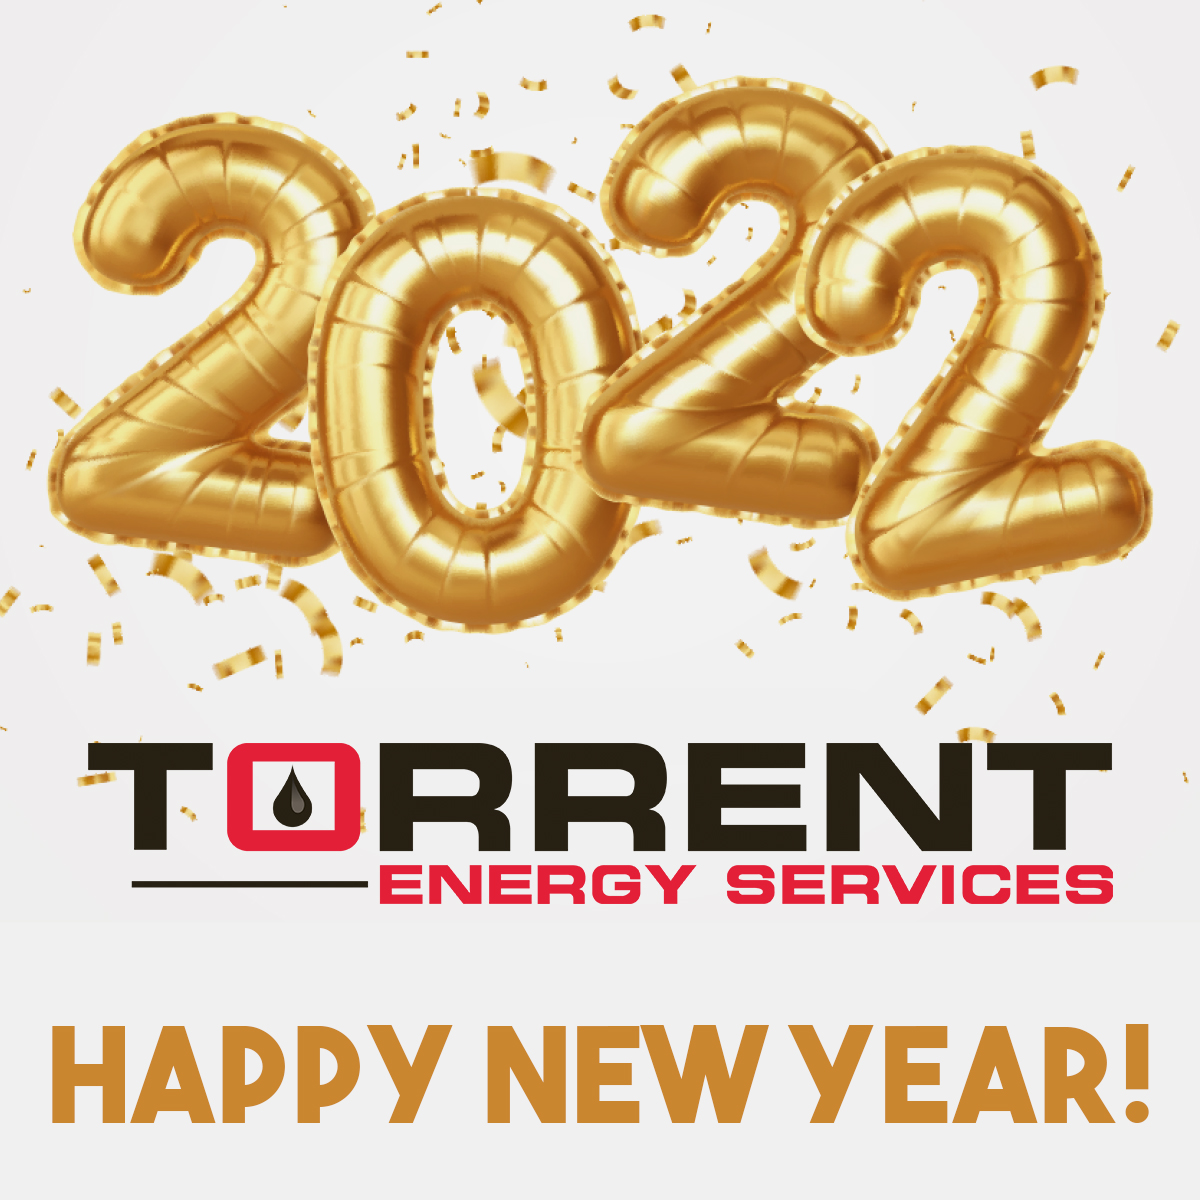 Happy New Year from Torrent Energy Services